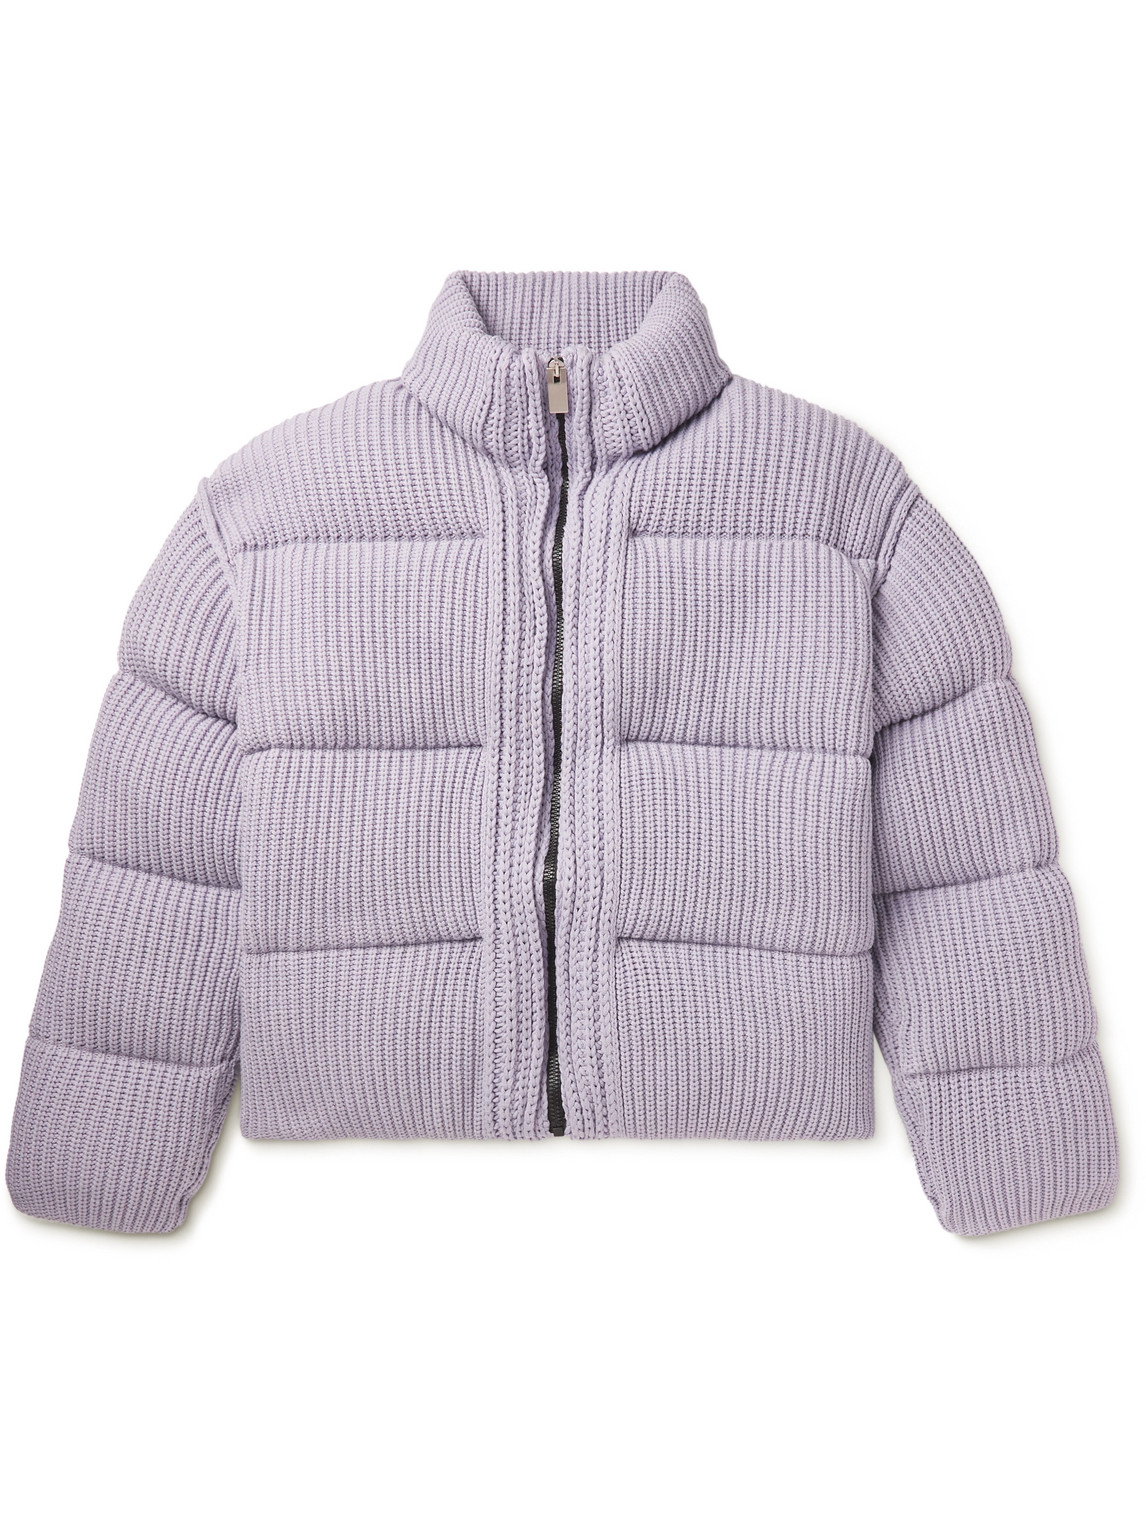 Moncler Genius 6 Moncler 1017 Alyx 9sm Quilted Ribbed-knit Down Jacket ...